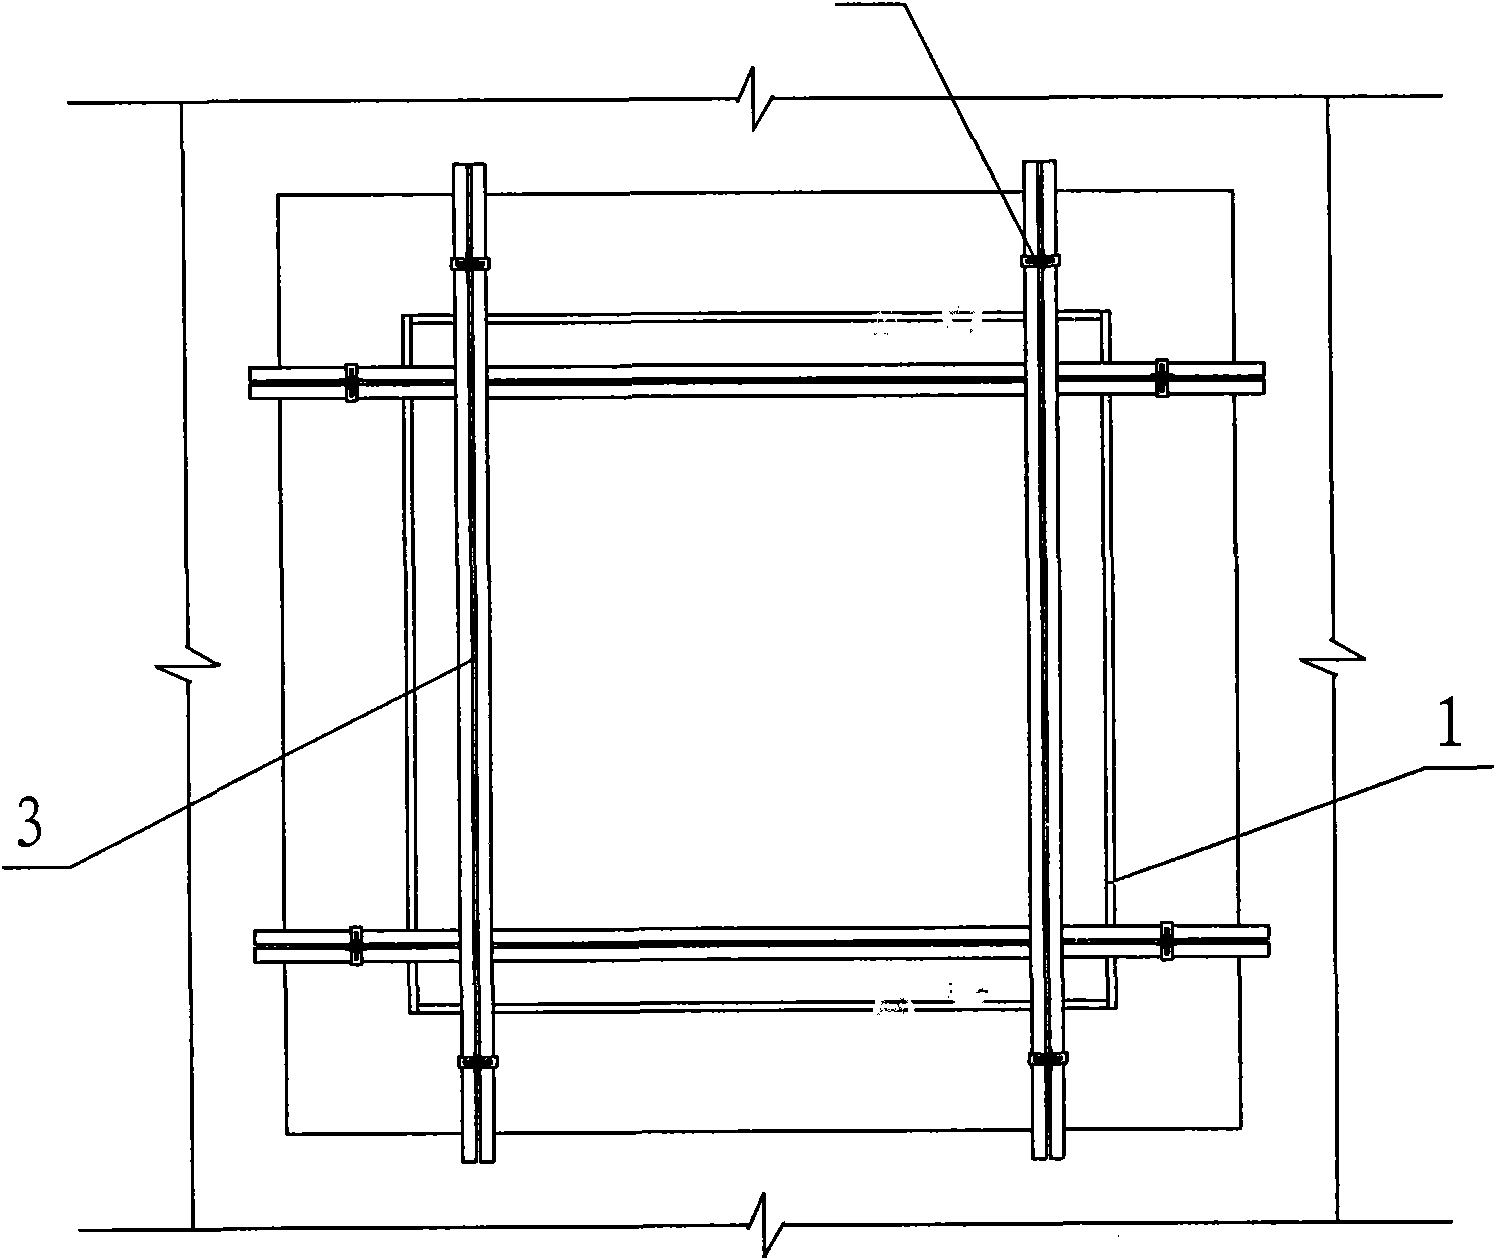 Construction method for resisting uplift in internal mold of concrete box